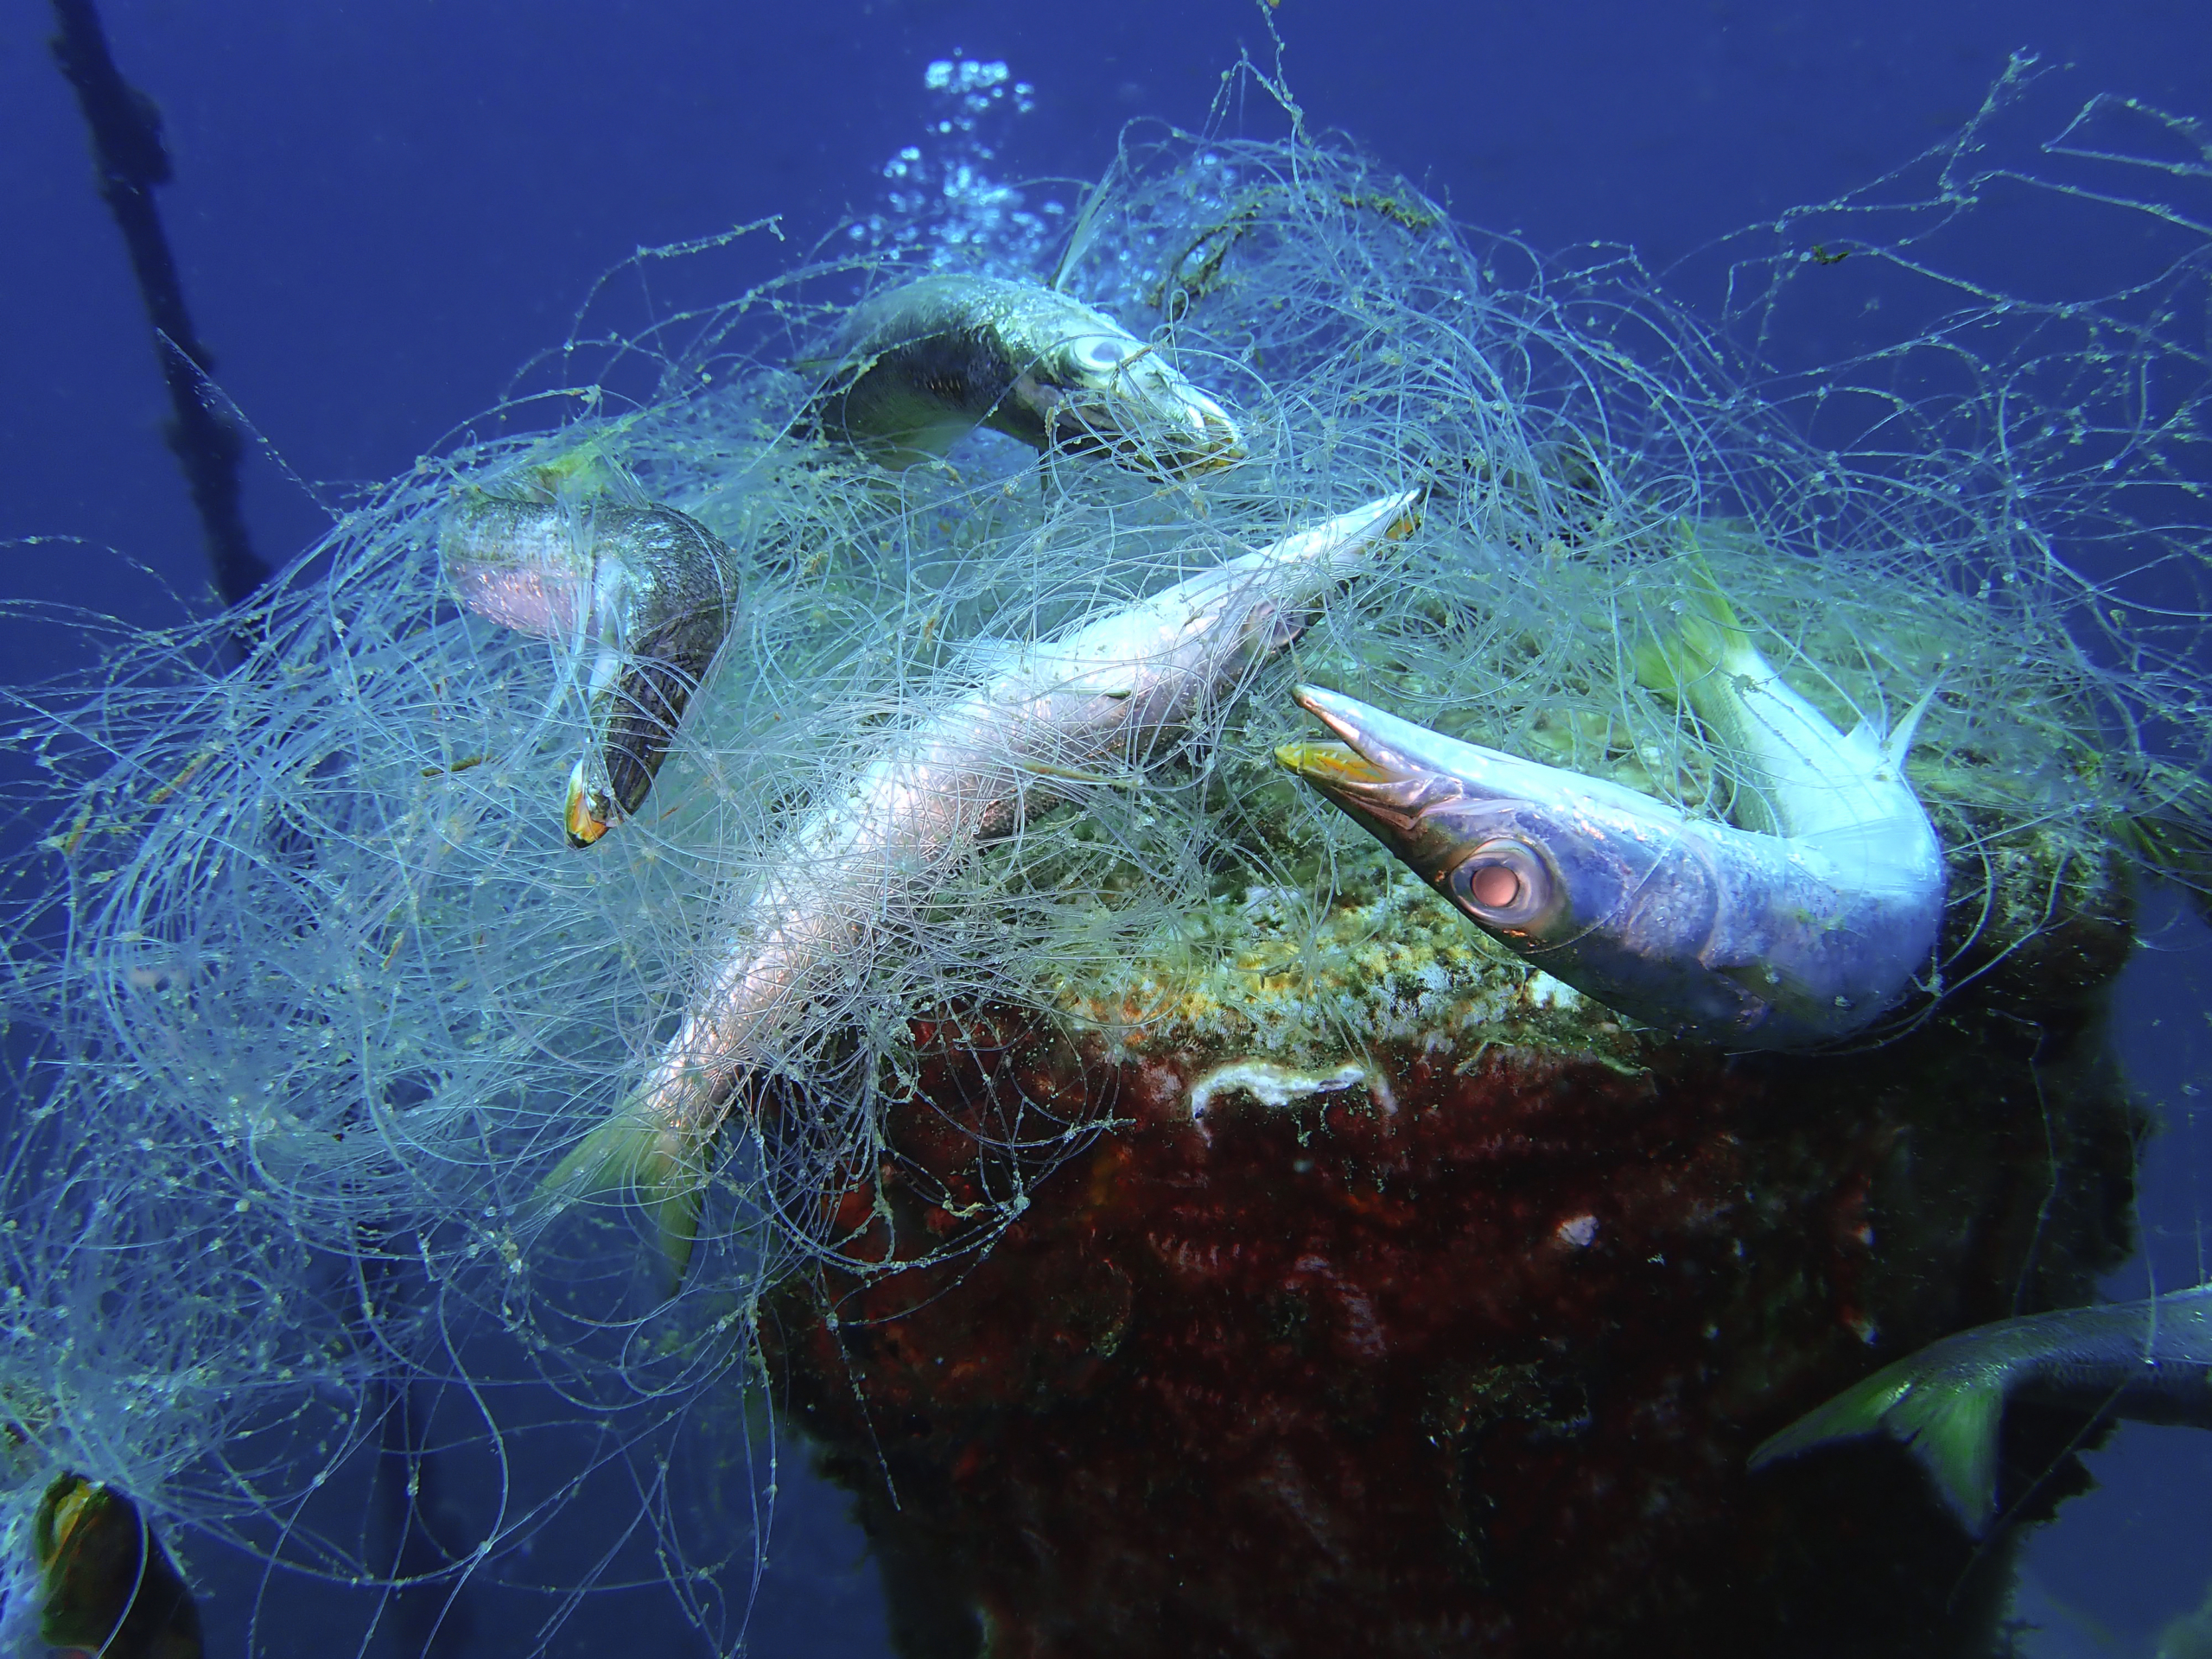 Ghost nets are commercial fishing nets that have been lost, abandoned, or  discarded at sea in Tunku Abdul Rahman Park, Kota Kinabalu. Sabah,  Malaysia, Borneo. - The Billfish Foundation